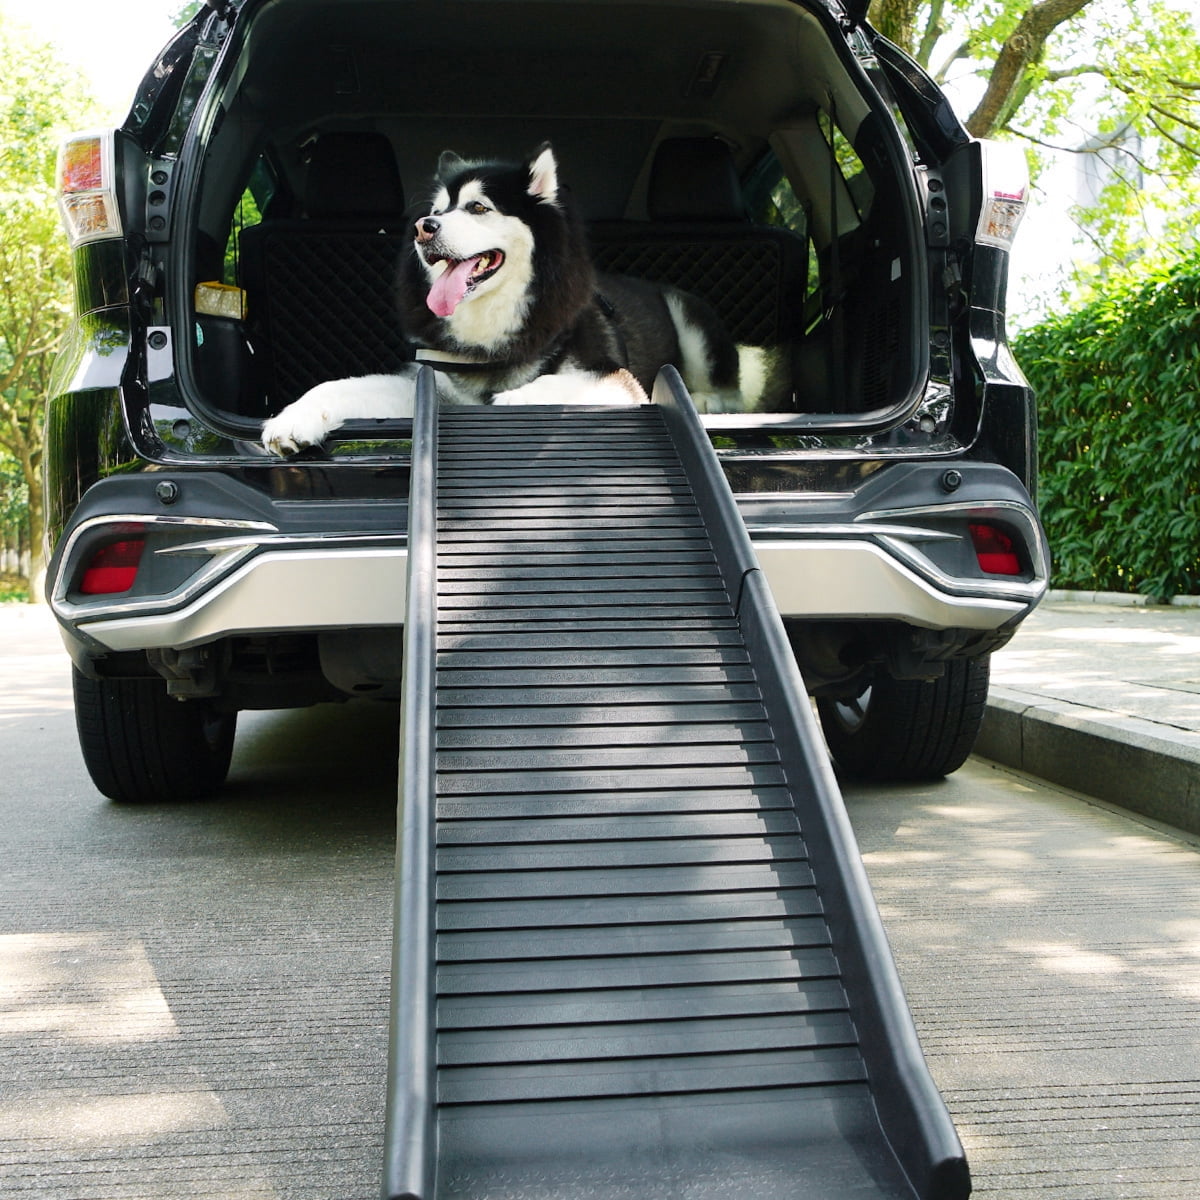 Portable Dog Ramp for Cars,High SUV Trucks Portable Stairs Ladder with Side Rails High Traction COZIWOW Upgrade Folding Pet Ramp Black Steel Frame for Extra Stability 63 L x 14.75 W 